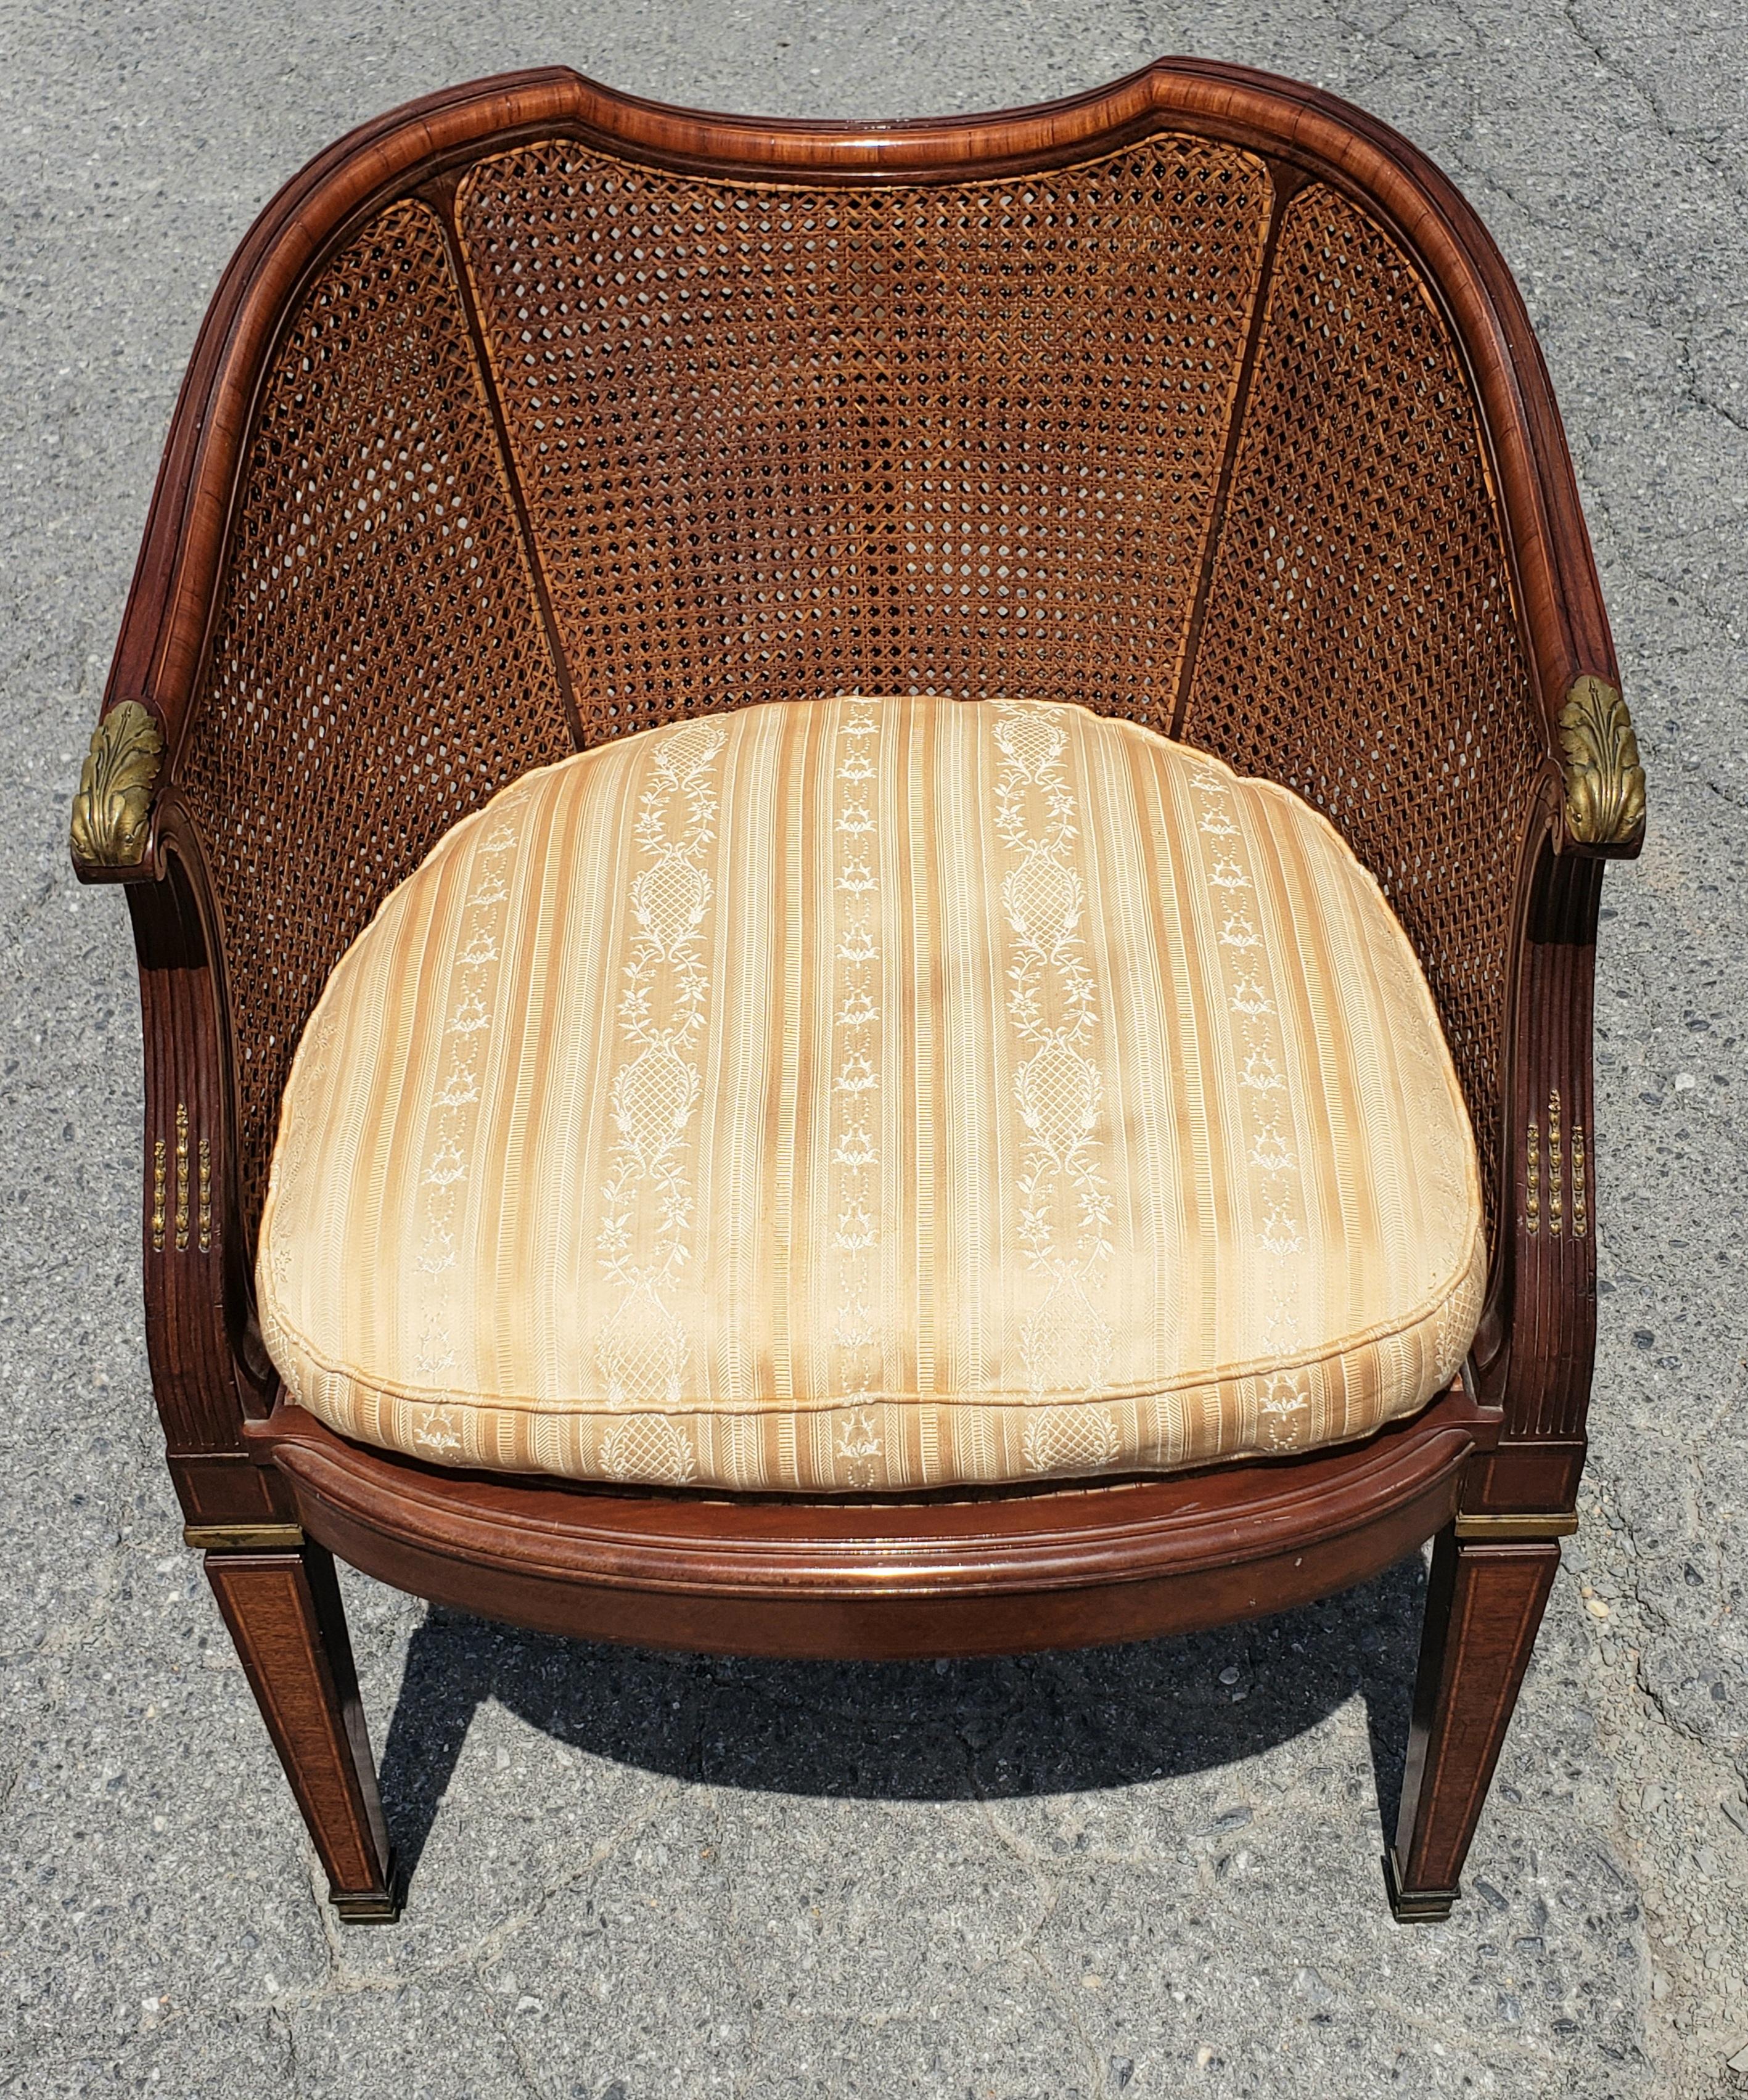 French Louis XV Transitional Mahogany and Kingwood Marquetry Burl and Cane Barrel Chair